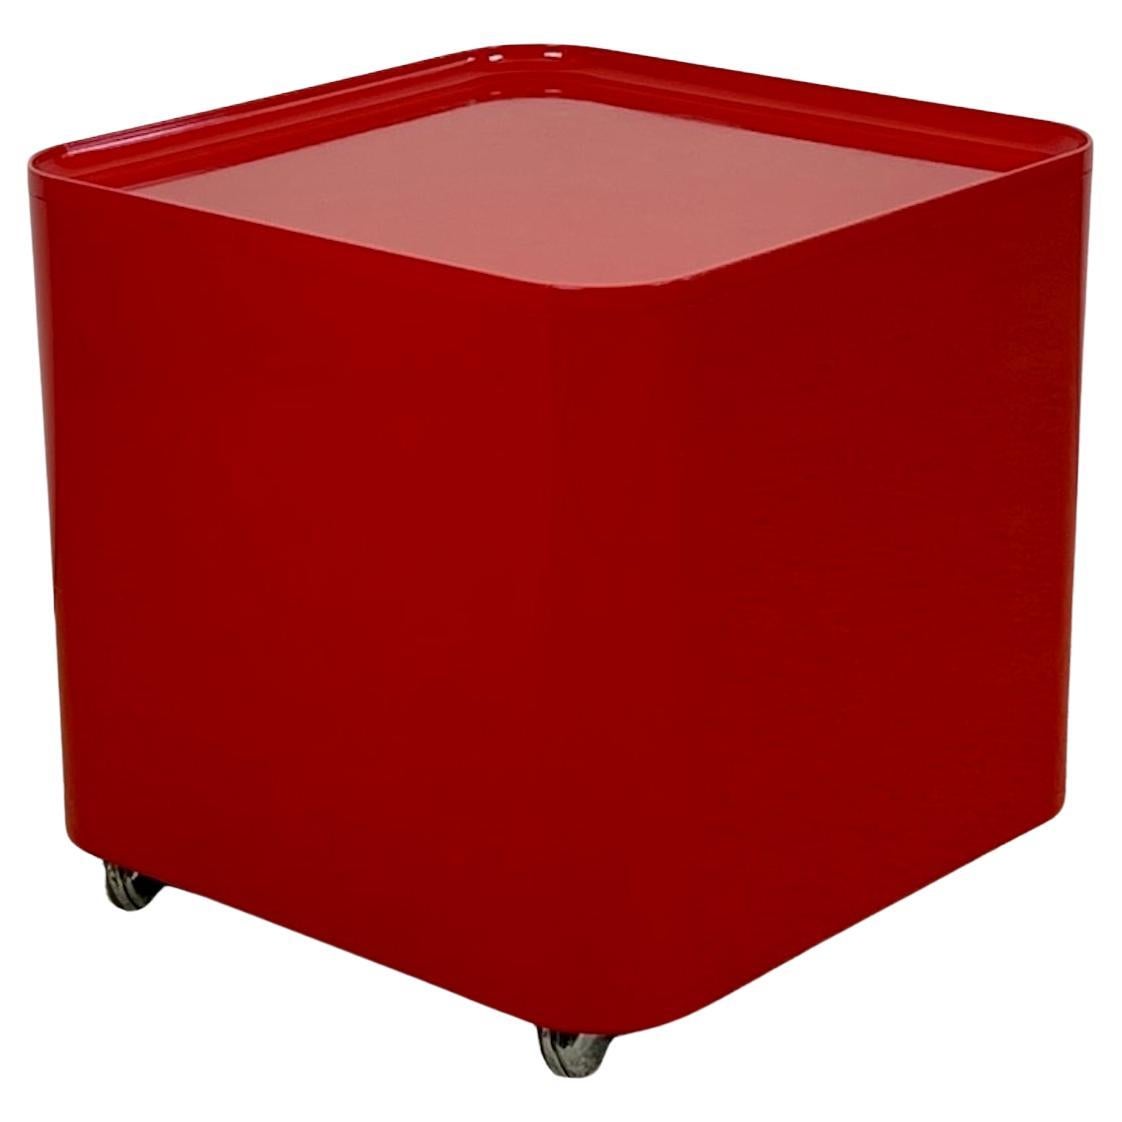 Space Age70s Red Table with Container DIME by Marcello Siard for Longato For Sale